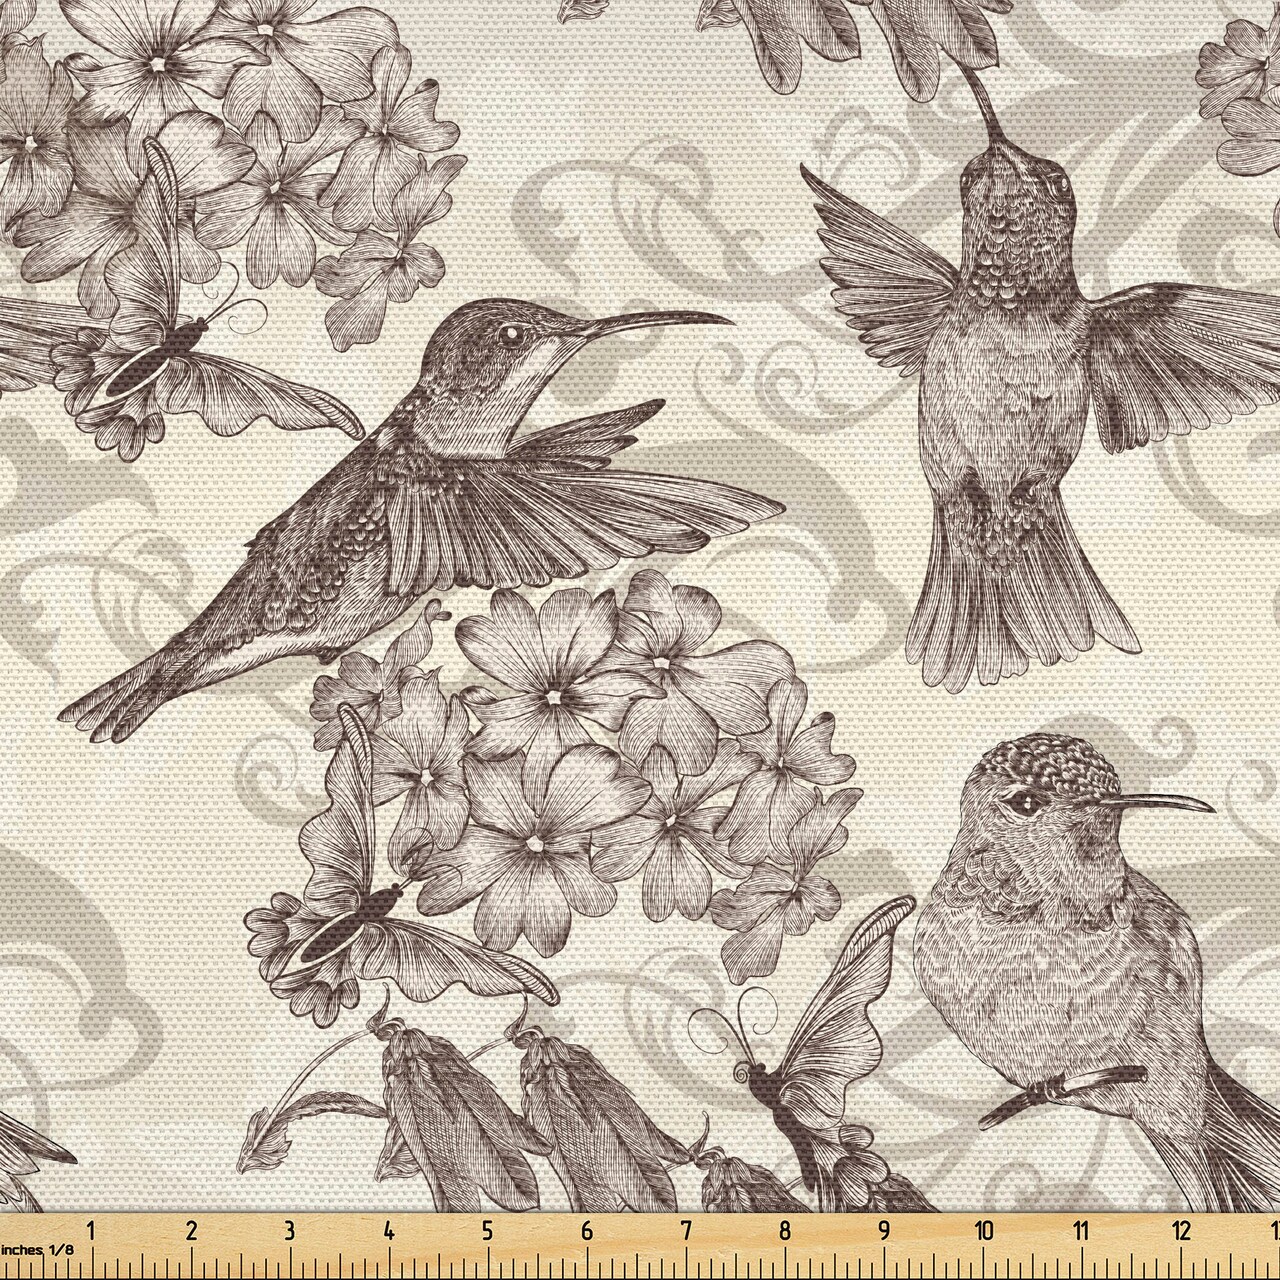 Ambesonne Hummingbirds Fabric by The Yard, Birds and Flowers Monochromic Classical Design Nostalgia Ornate, Decorative Fabric for Upholstery and Home Accents, 5 Yards, Brown Beige